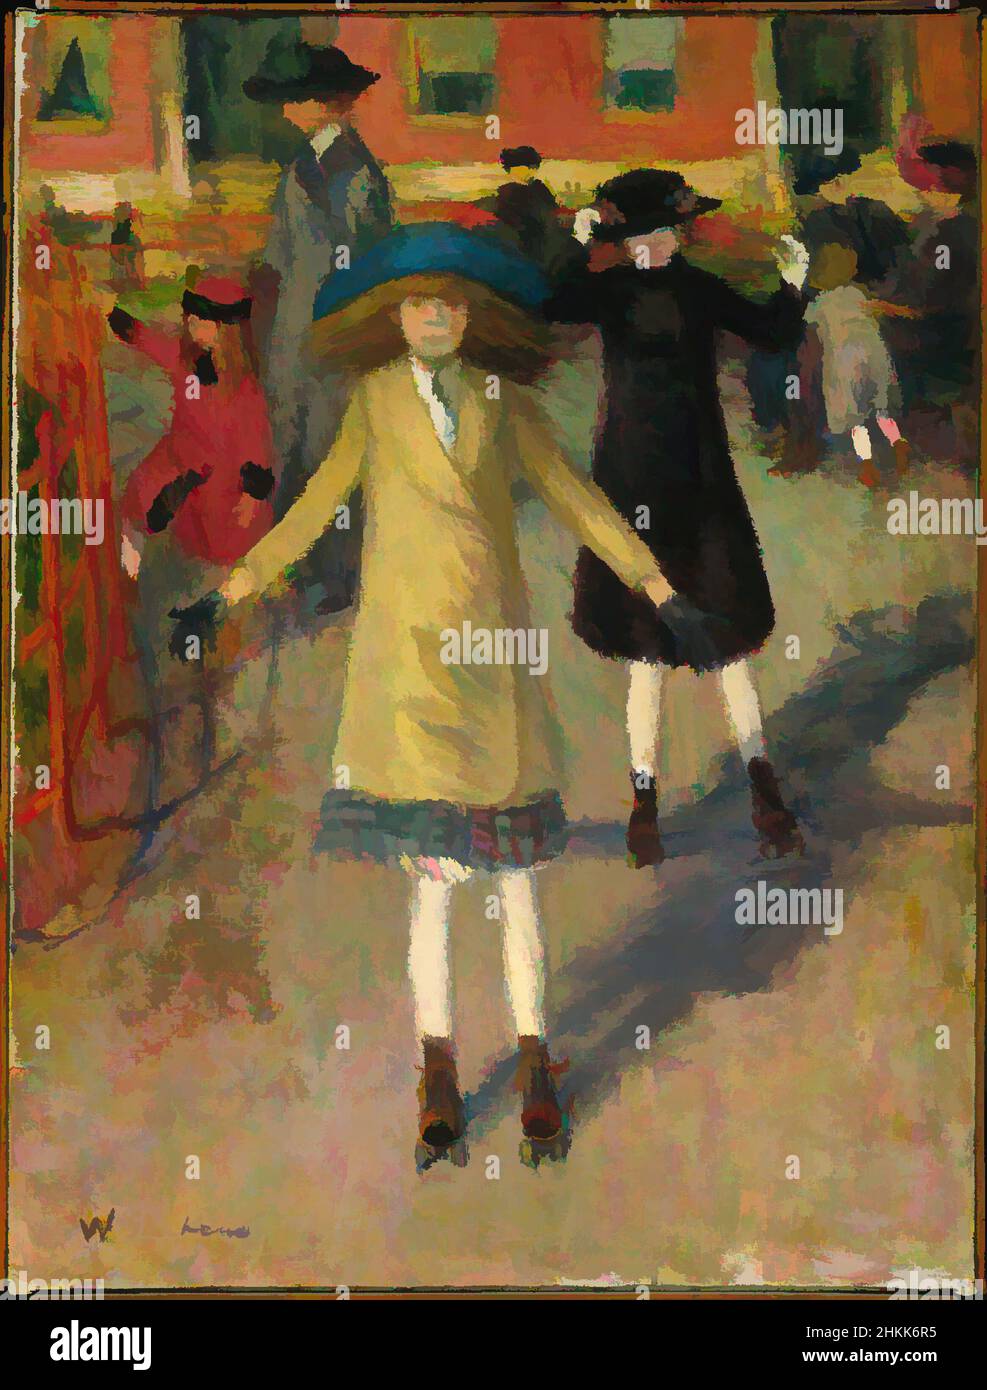 Art inspired by Children Rollerskating, William Glackens, American, 1870-1938, Oil on canvas, ca. 1912-14, 23 3/4 x 17 15/16 in., 60.3 x 45.6 cm, 20th, 20thC, American oil, Century, childhood, children, early 20th century art, female, female figures, fun, girls, impressionist, leisure,, Classic works modernized by Artotop with a splash of modernity. Shapes, color and value, eye-catching visual impact on art. Emotions through freedom of artworks in a contemporary way. A timeless message pursuing a wildly creative new direction. Artists turning to the digital medium and creating the Artotop NFT Stock Photo